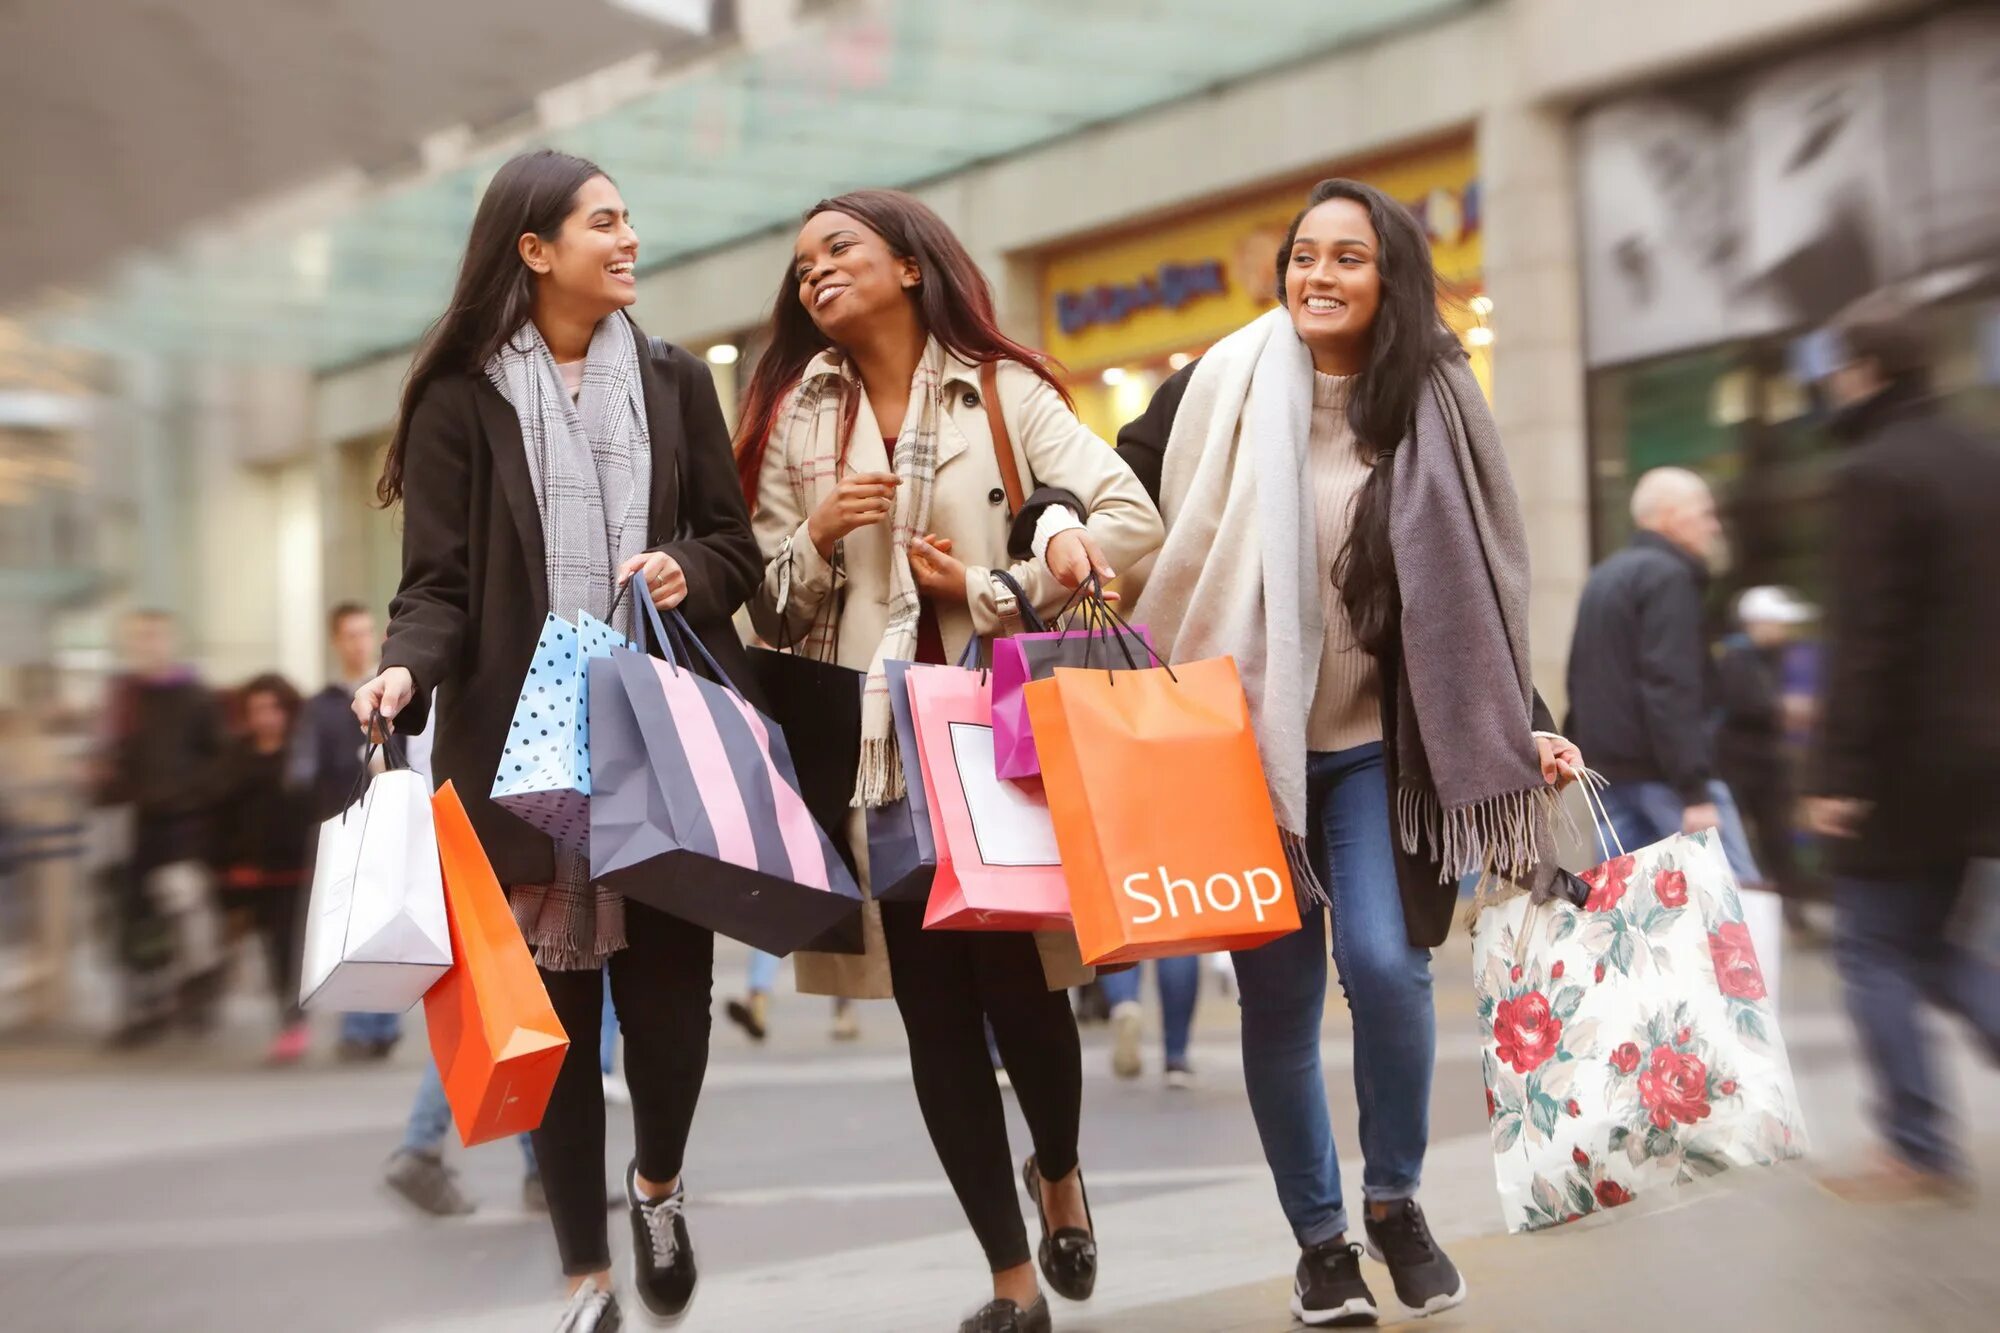 1- She’ll go shopping in Town …. Consumer confidence. L go shopping